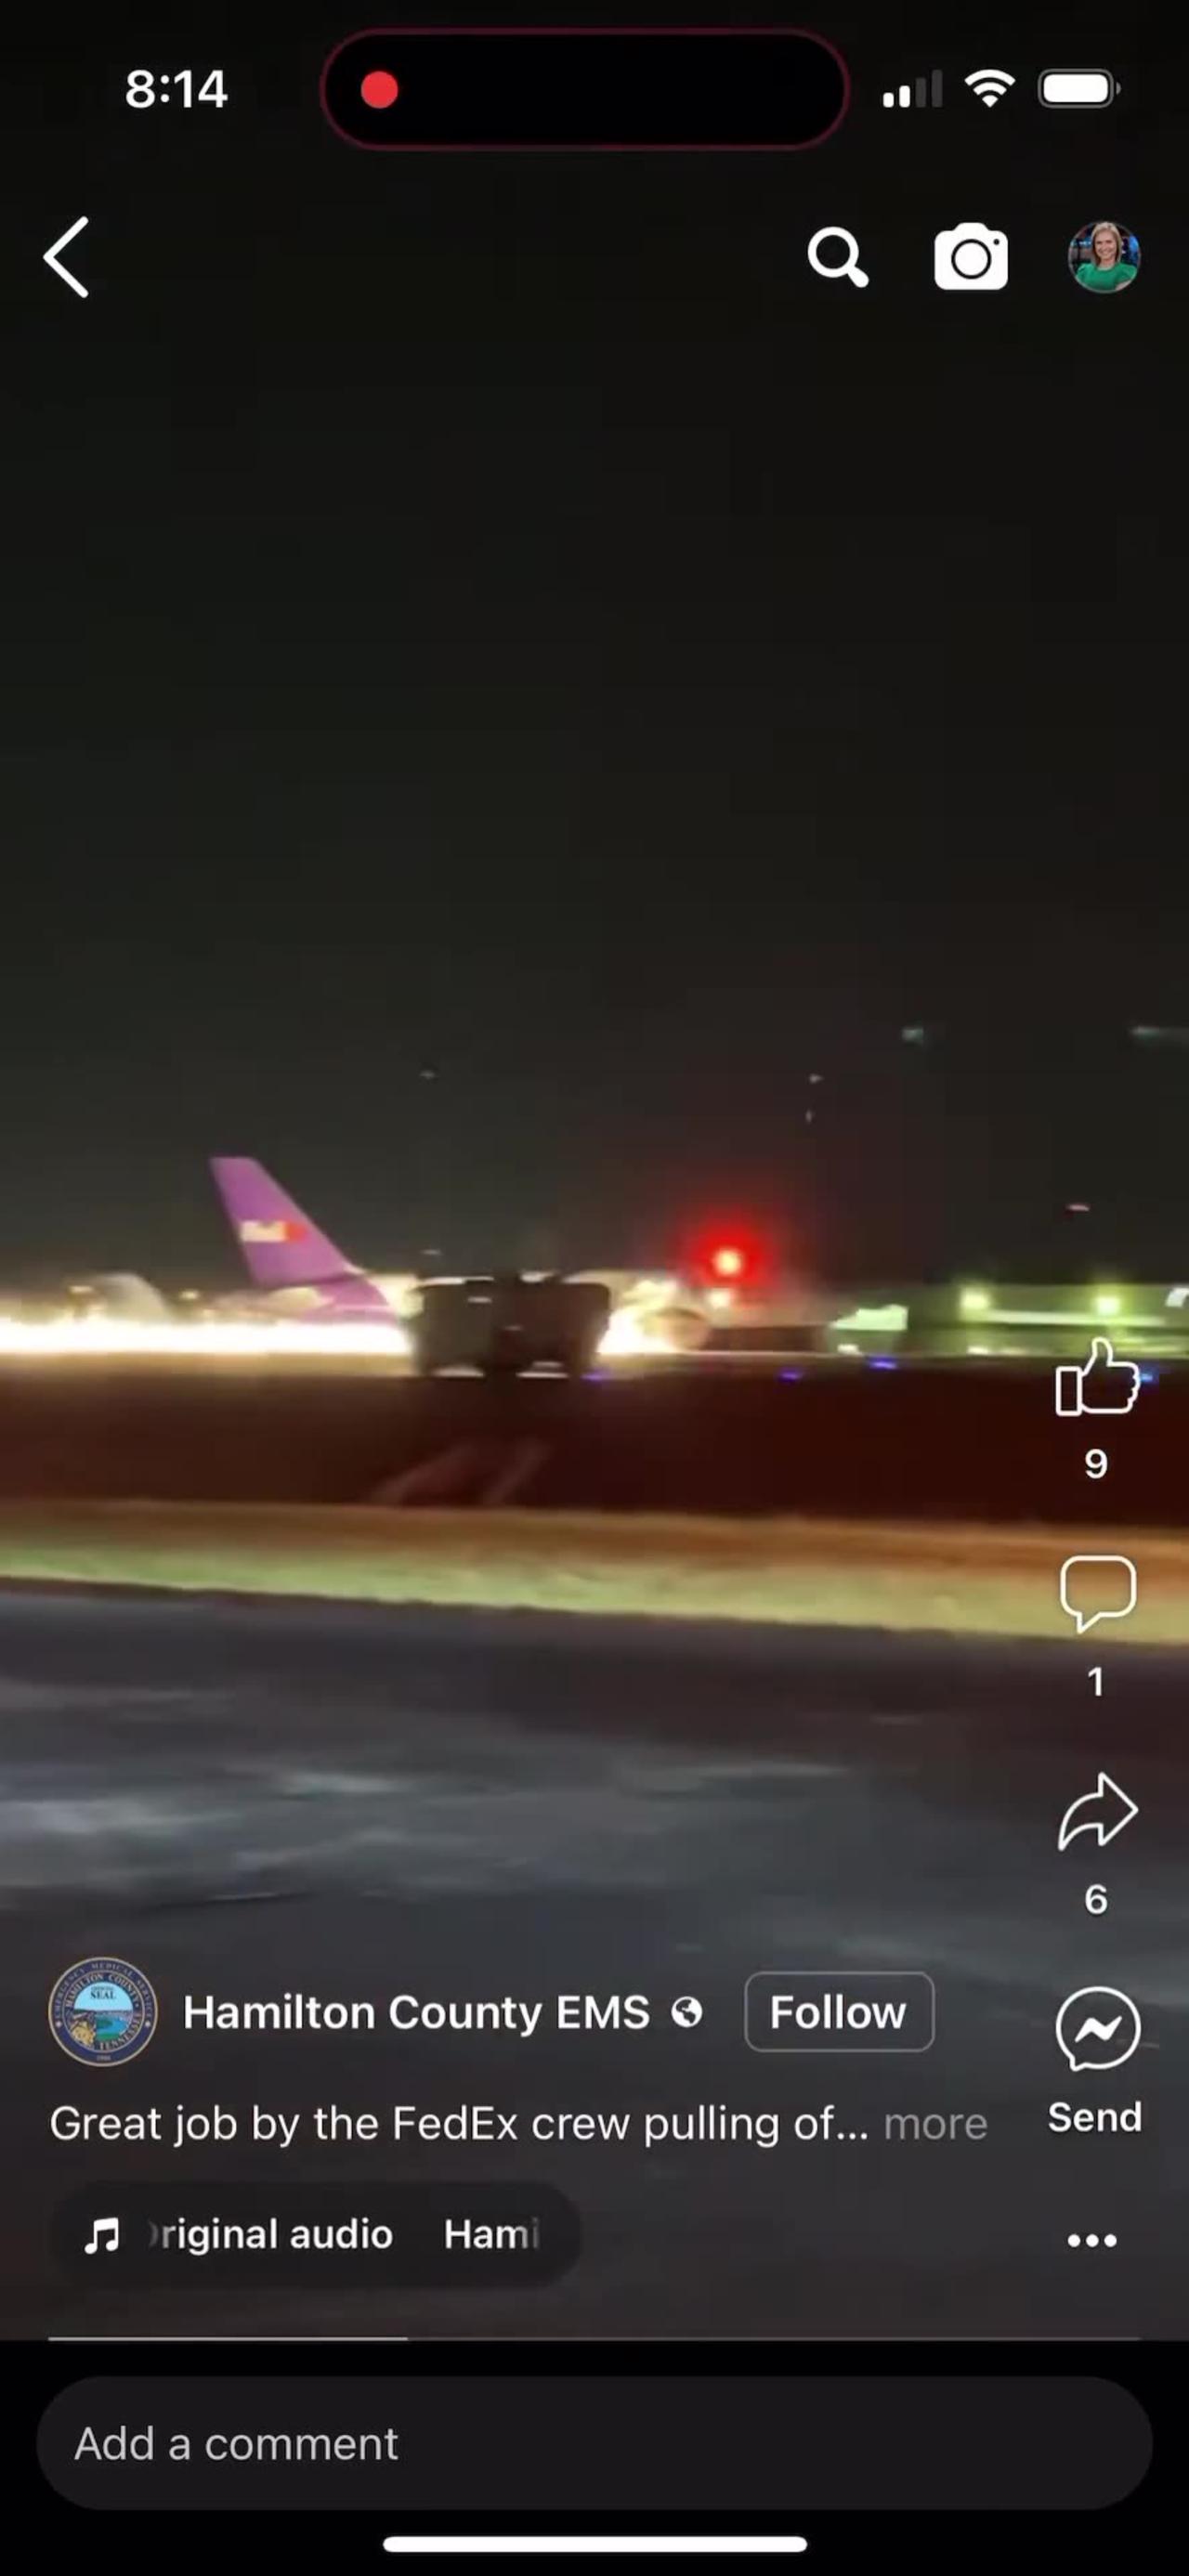 FedEx Boeing 757 with landing gear failure crash landed on runway in Chattanooga, Tennessee